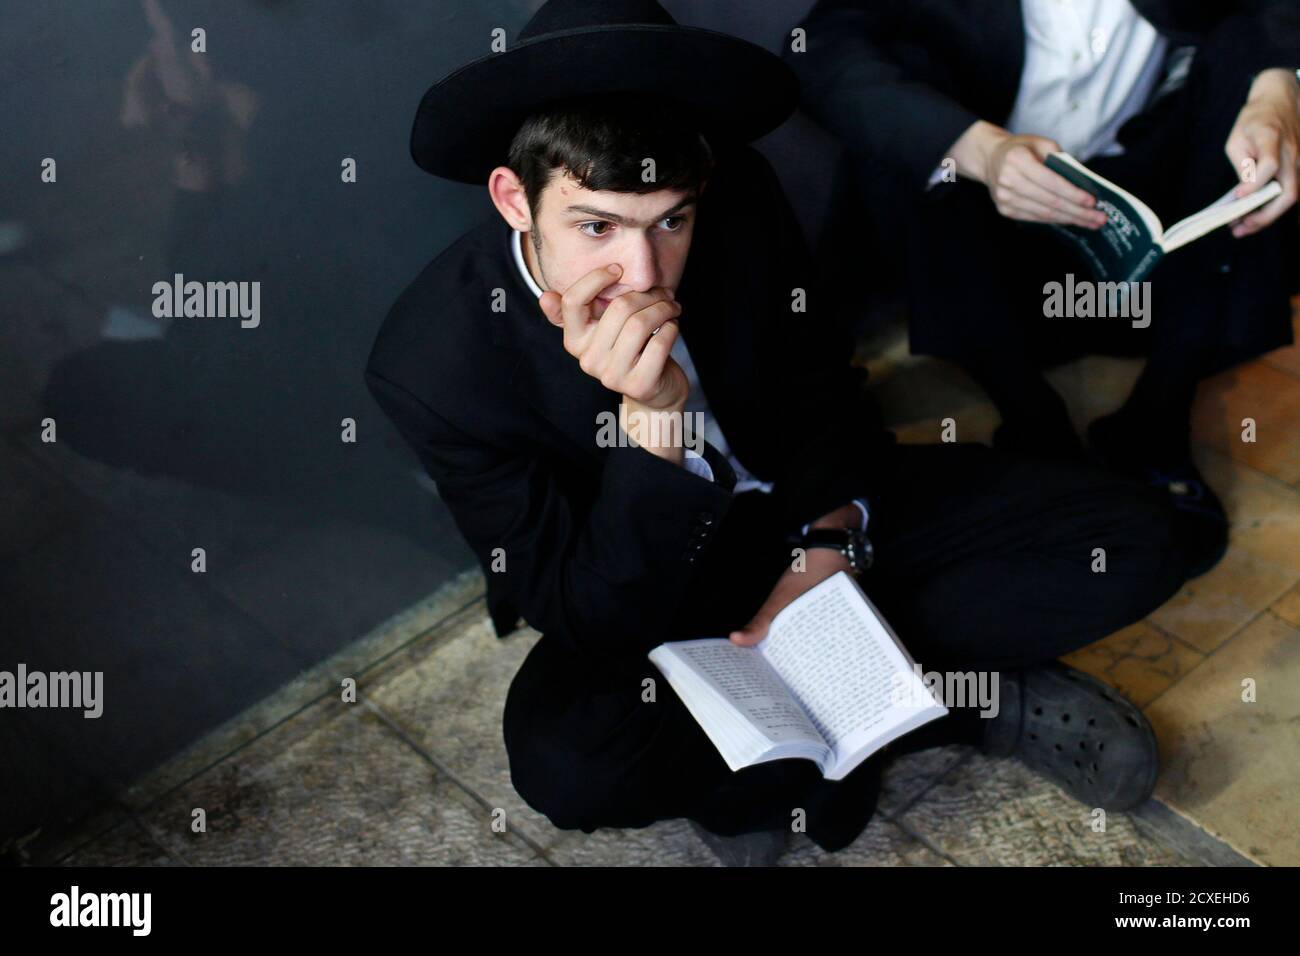 A Jewish worshipper takes part in prayers marking Tisha B'Av at the Western Wall, Judaism's holiest prayer site, in Jerusalem's Old City August 5, 2014. Tisha B'Av, a day of fasting and lament, commemorates the date in the Jewish calendar on which it is believed that First and Second Temples were destroyed in Jerusalem. REUTERS/Siegfried Modola (JERUSALEM - Tags: RELIGION) Stock Photo